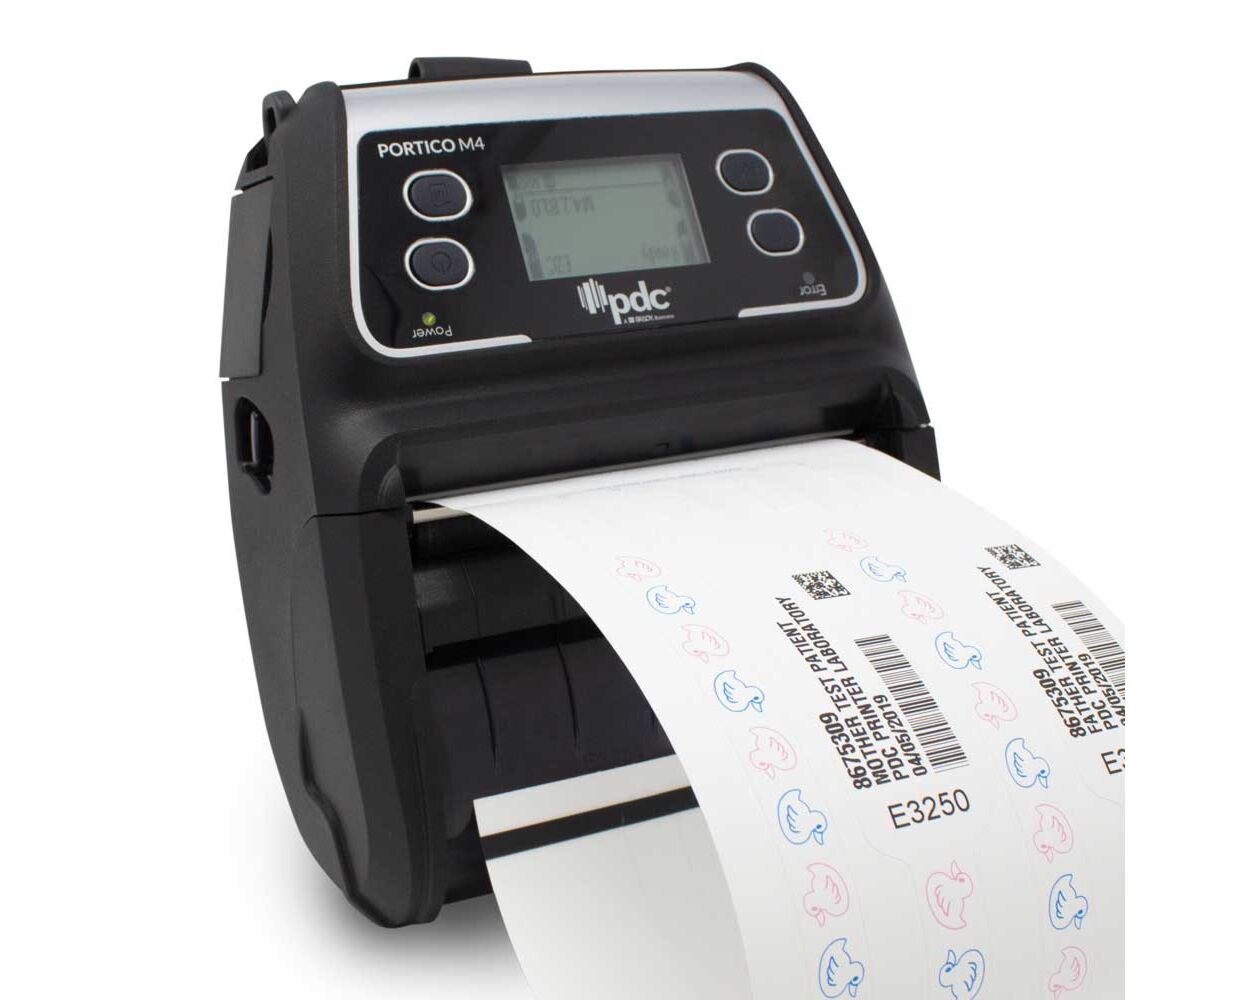 Printers & Scanners Products, Supplies and Equipment